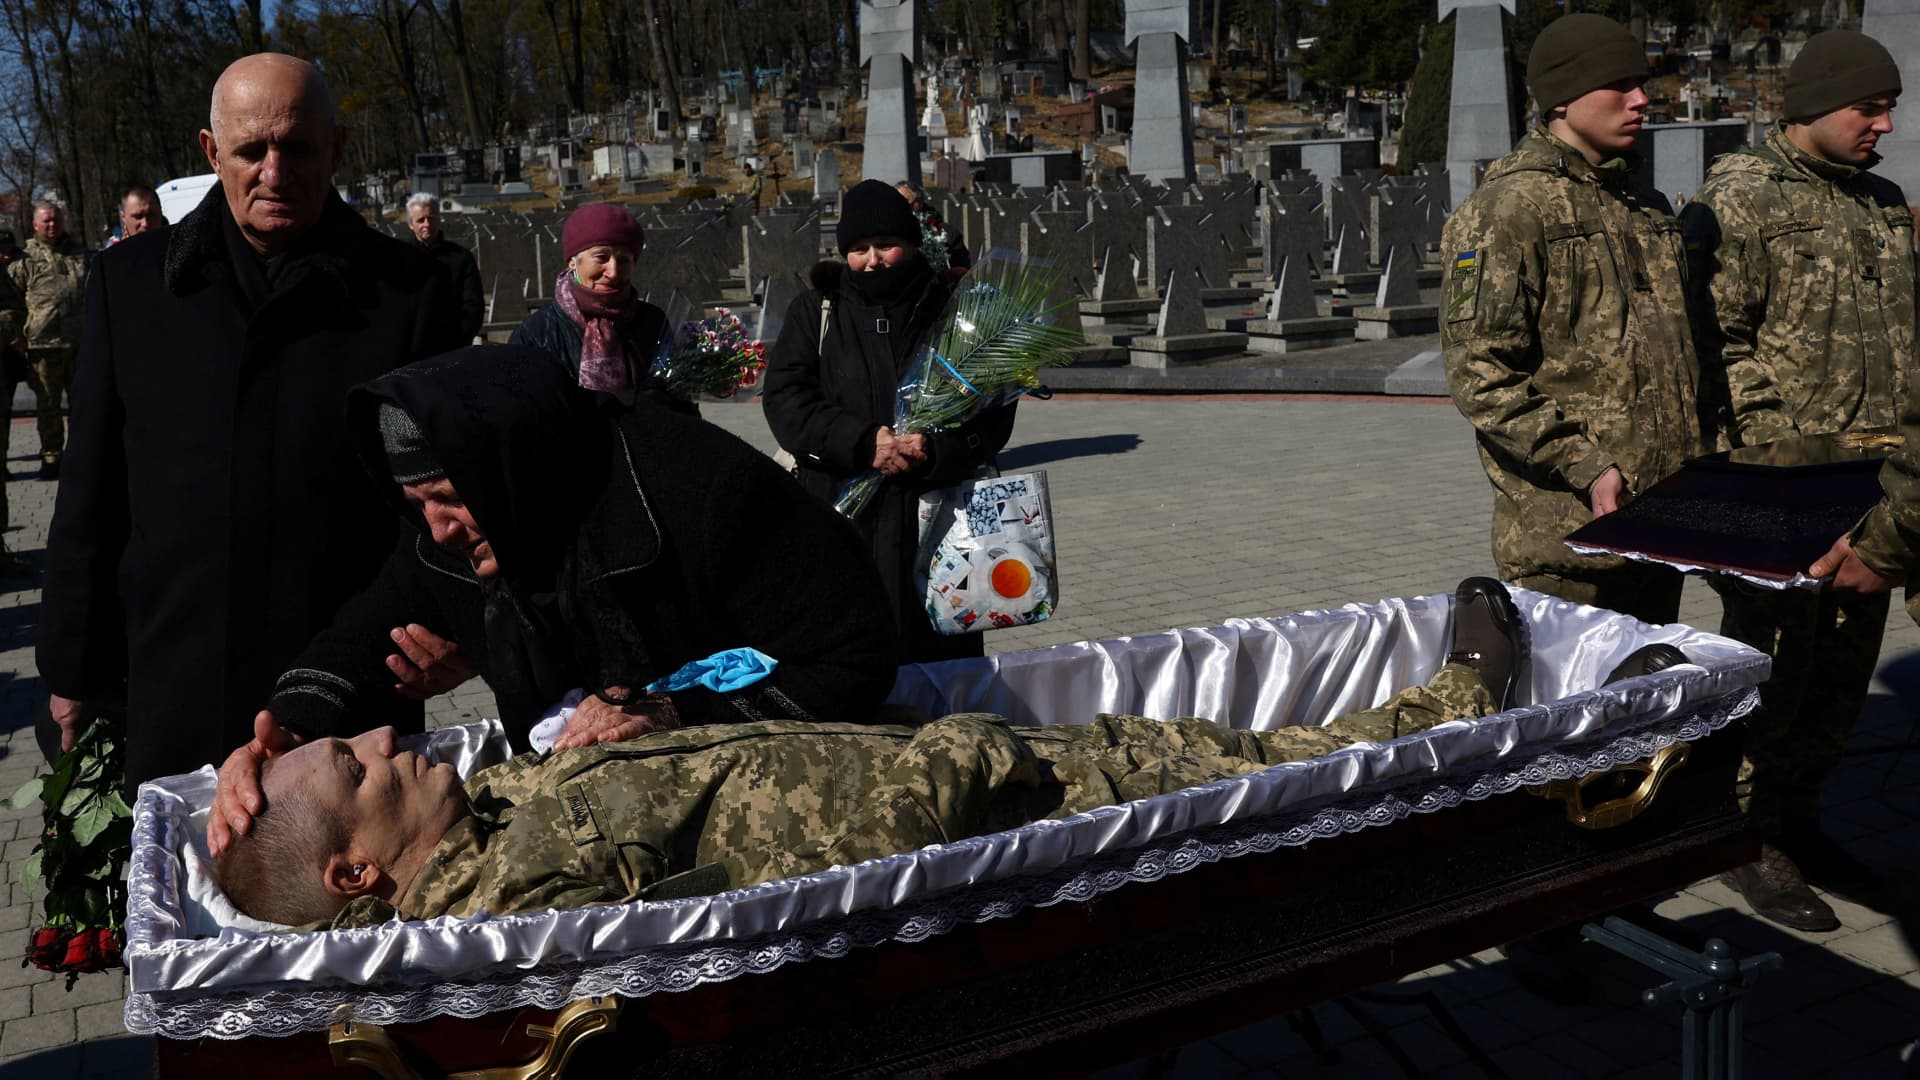 SENSITIVE MATERIAL. THIS IMAGE MAY OFFEND OR DISTURB Family members and comrades of Ivan Skrypnyk, who was killed in a rocket attack against a military base in Yavoriv during the ongoing Russian invasion, pays their last respect during his memorial service in Lviv, Ukraine, March 17, 2022.